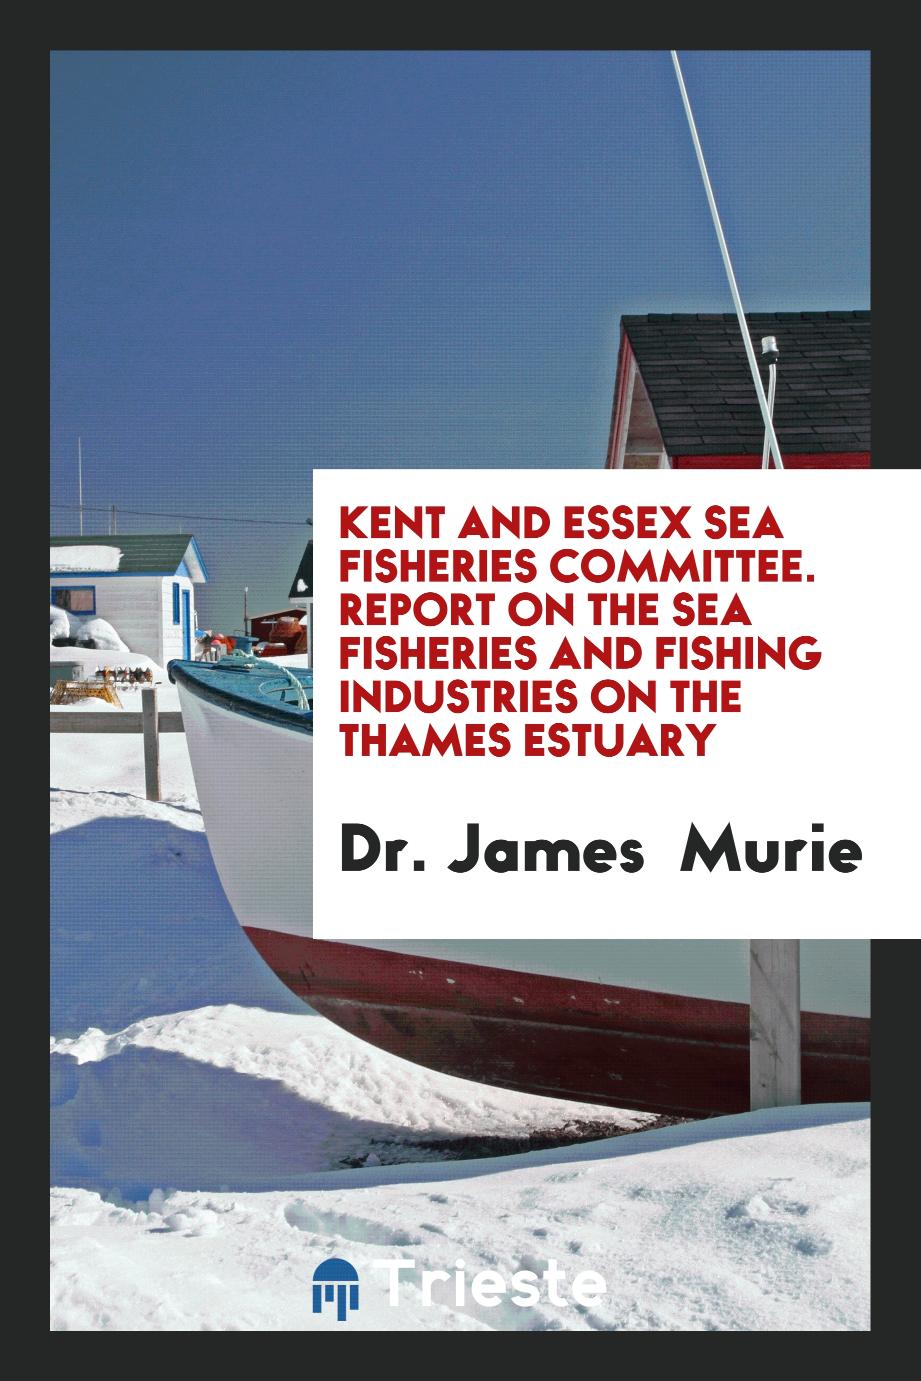 Kent and Essex Sea Fisheries Committee. Report on the Sea Fisheries and Fishing Industries on the Thames Estuary